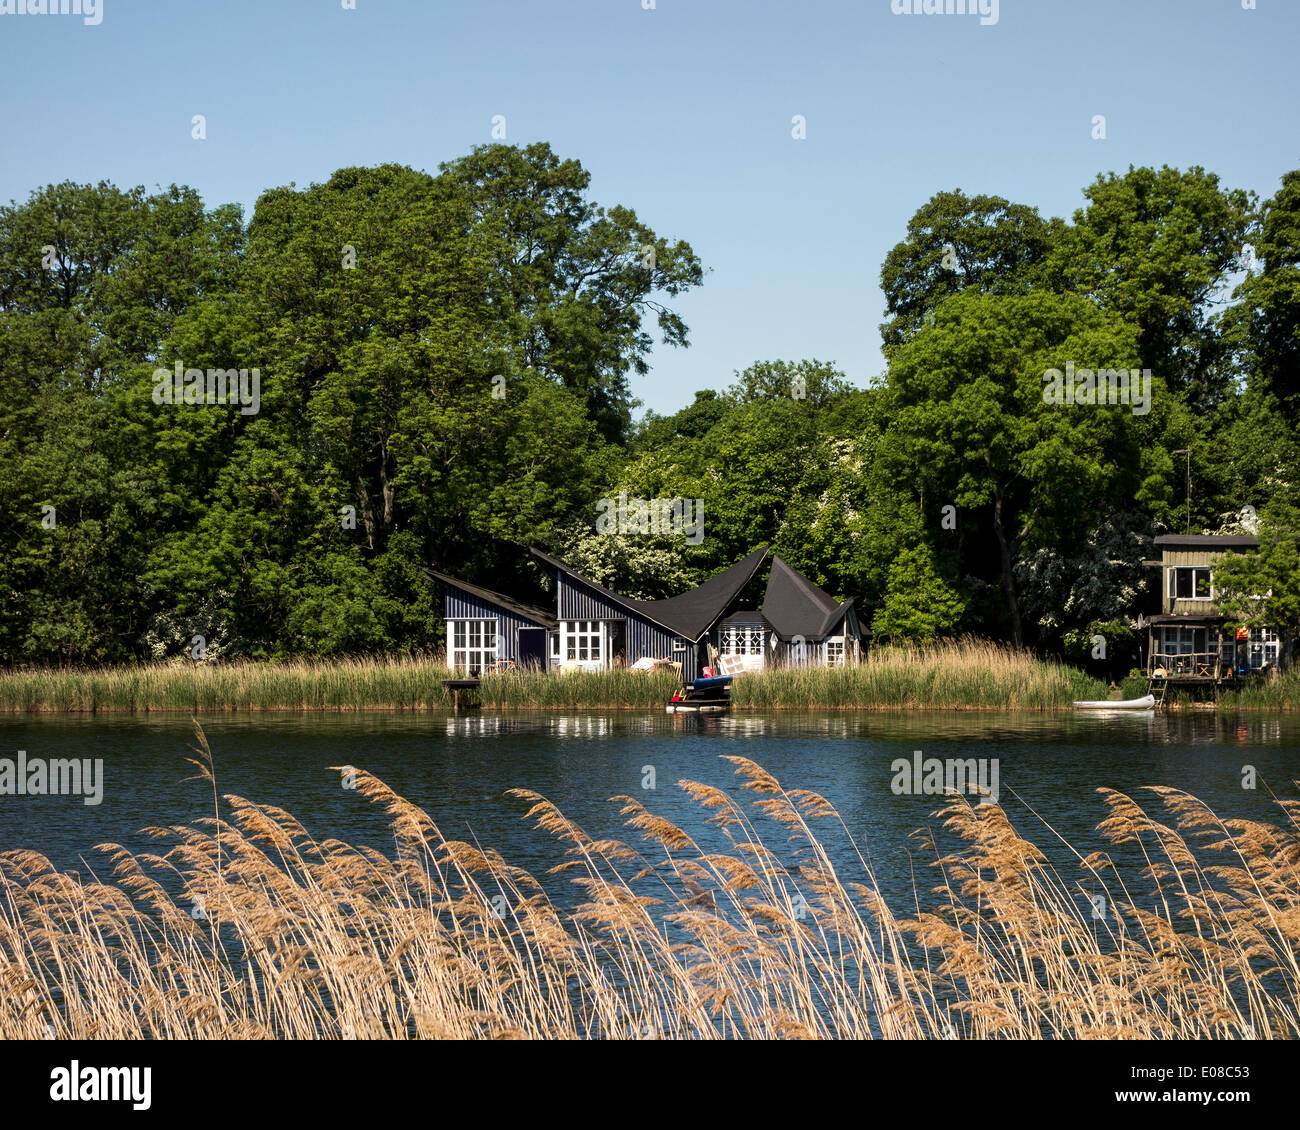 Christiania, Copenhagen, Denmark. Architect: Unknown, 1971. House by the lake in Christiania. Stock Photo